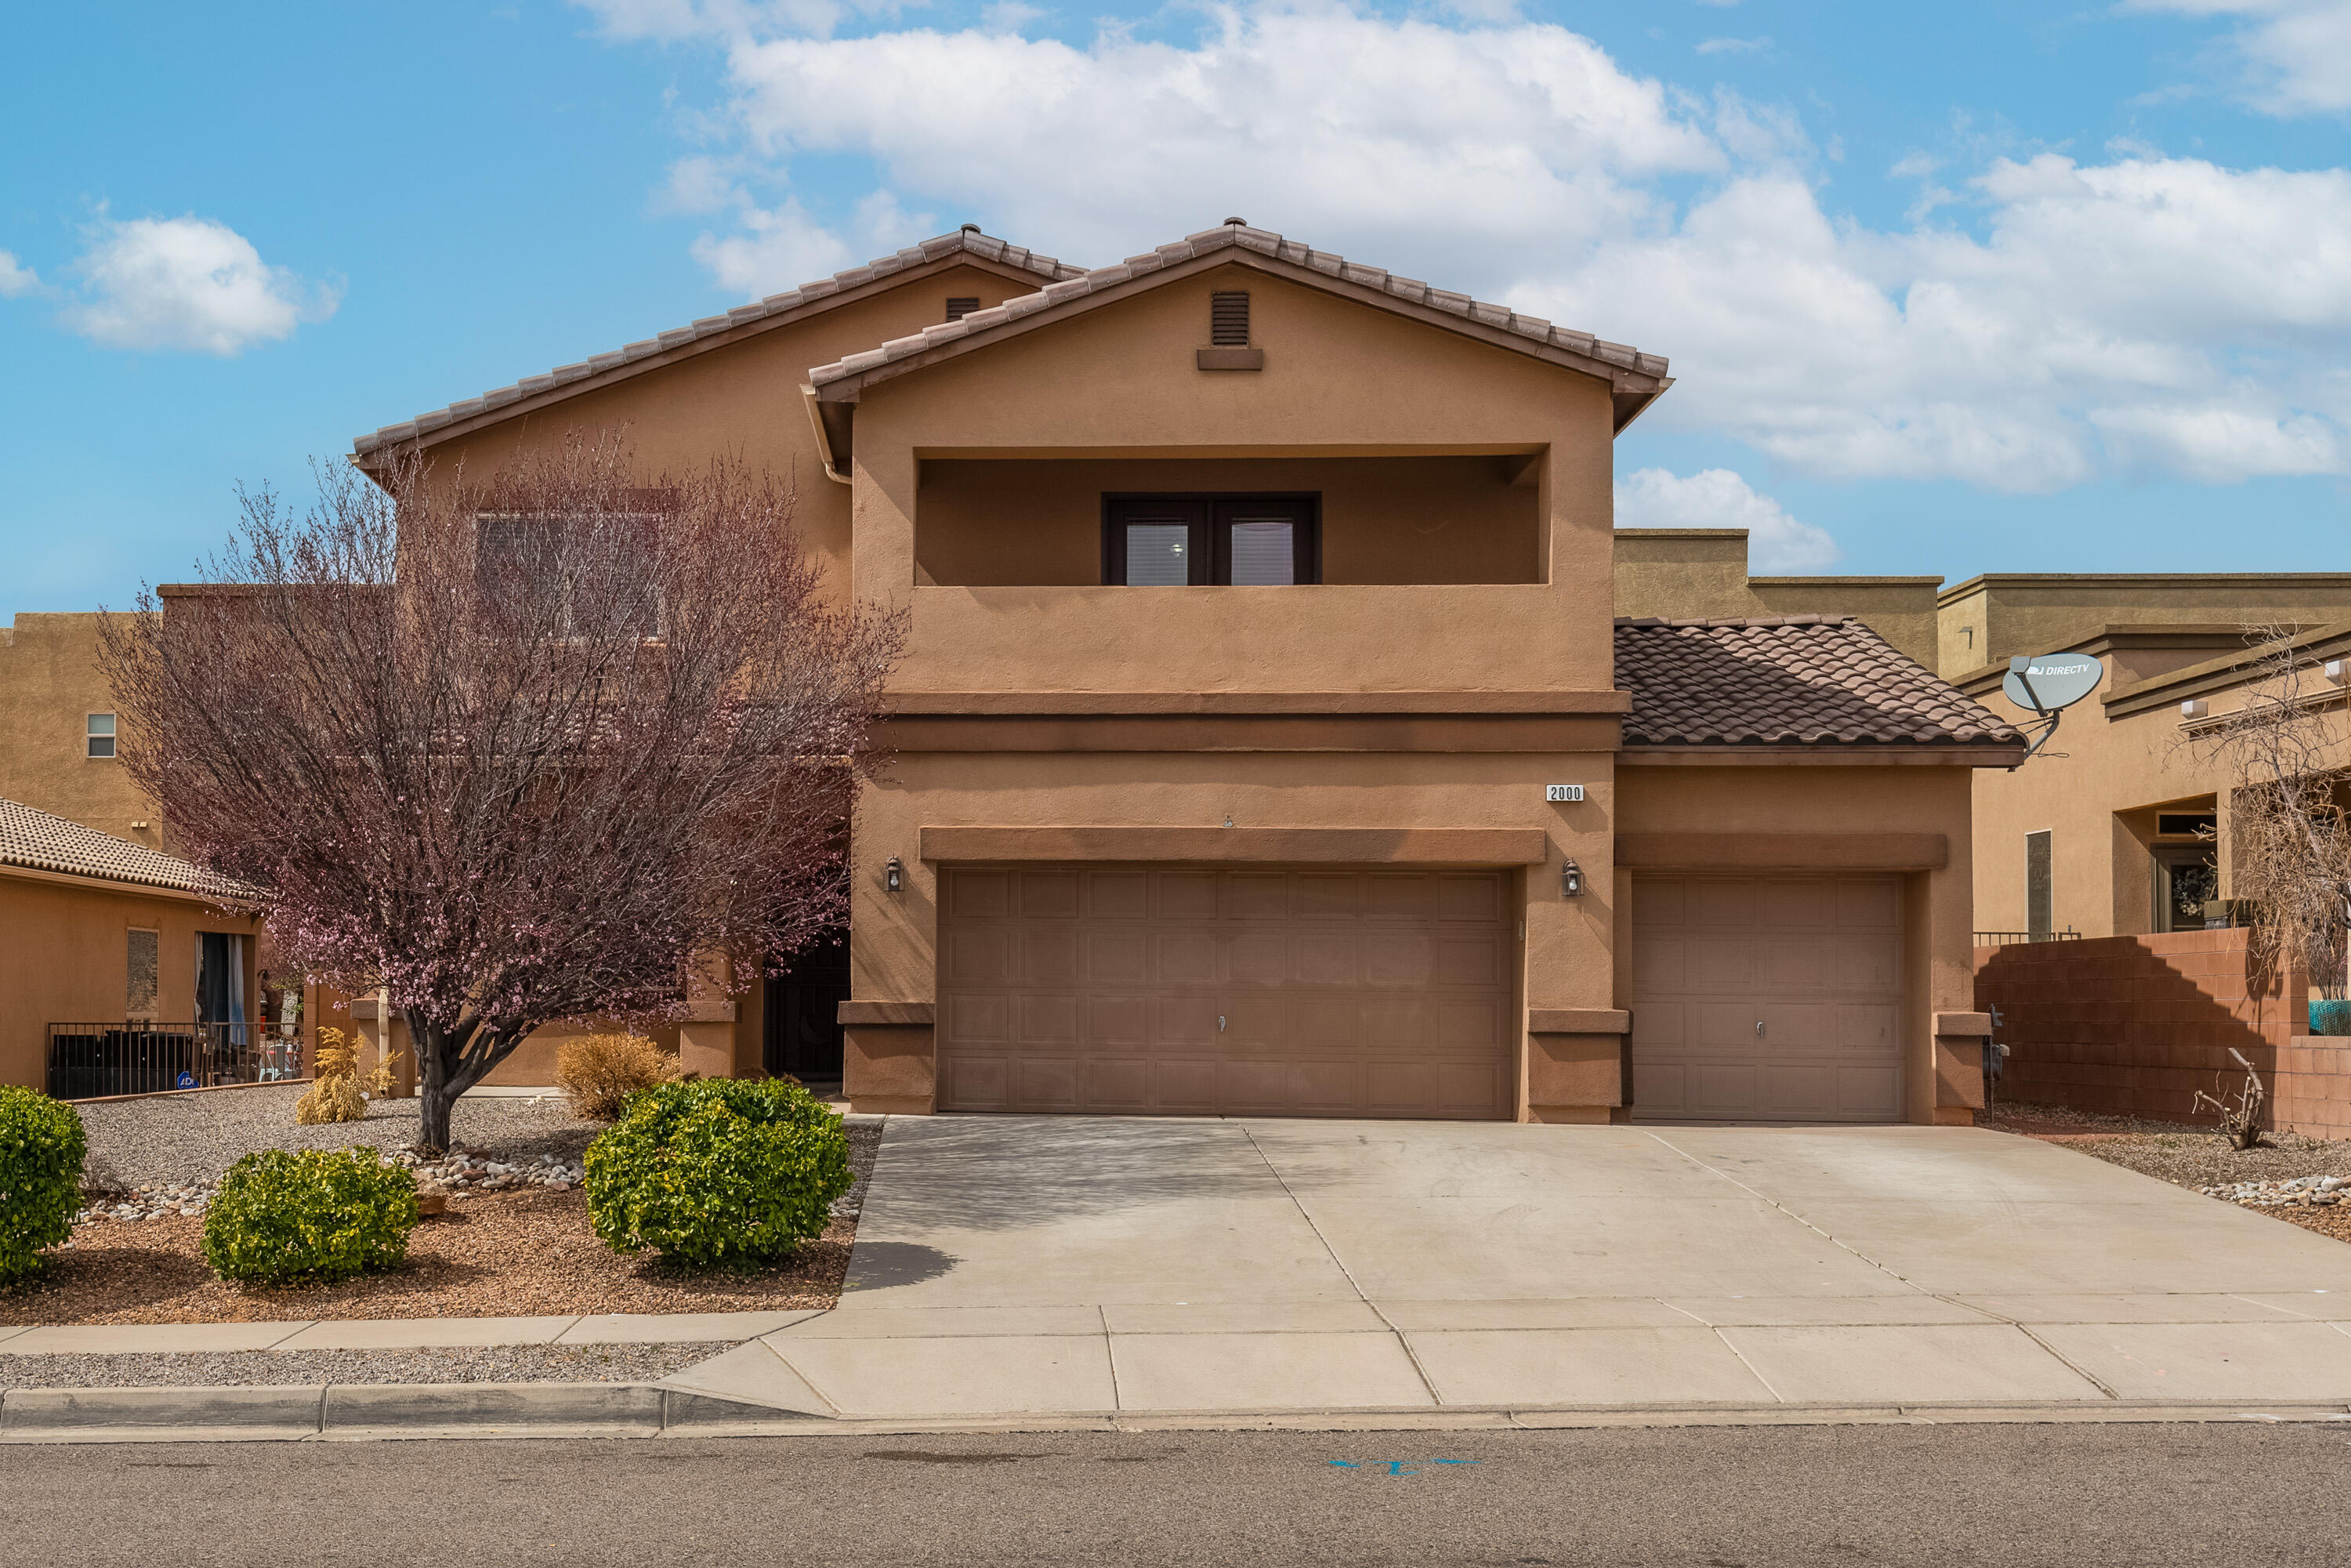 $5,000 INCENTIVE TO USE TOWARDS PRICE REDUCTION OR CREDIT AT CLOSING! MUST SEE WITH OVER $13,000 IN RECENT UPDATES - MOVE IN READY! Located in the Lovely Subdivision of Las Brisas Cabezon, this home features NEW Freestanding Gas Range, NEW S/S Microwave, NEW Carpet, NEW PROFESSIONAL PAINT in Modern Neutral Color, NEW Thermostats and Lights throughout.  Professionally Cleaned Tile & Grout. Tankless Water Heater Replaced in 2022!  Front Flex-Room Perfect for Home Office, or Possible 5th Bedroom. Enjoy Mountain Views from your covered Martini Balcony, located directly off your Primary Bedroom. Gourmet Kitchen w/Island, Large Pantry, Decorative Ledges. Security Door Front and Sliding back. Ceiling Fans, Gas Log Fireplace, Two Refrigerated AC Units, Covered Front Entry & Back Pati